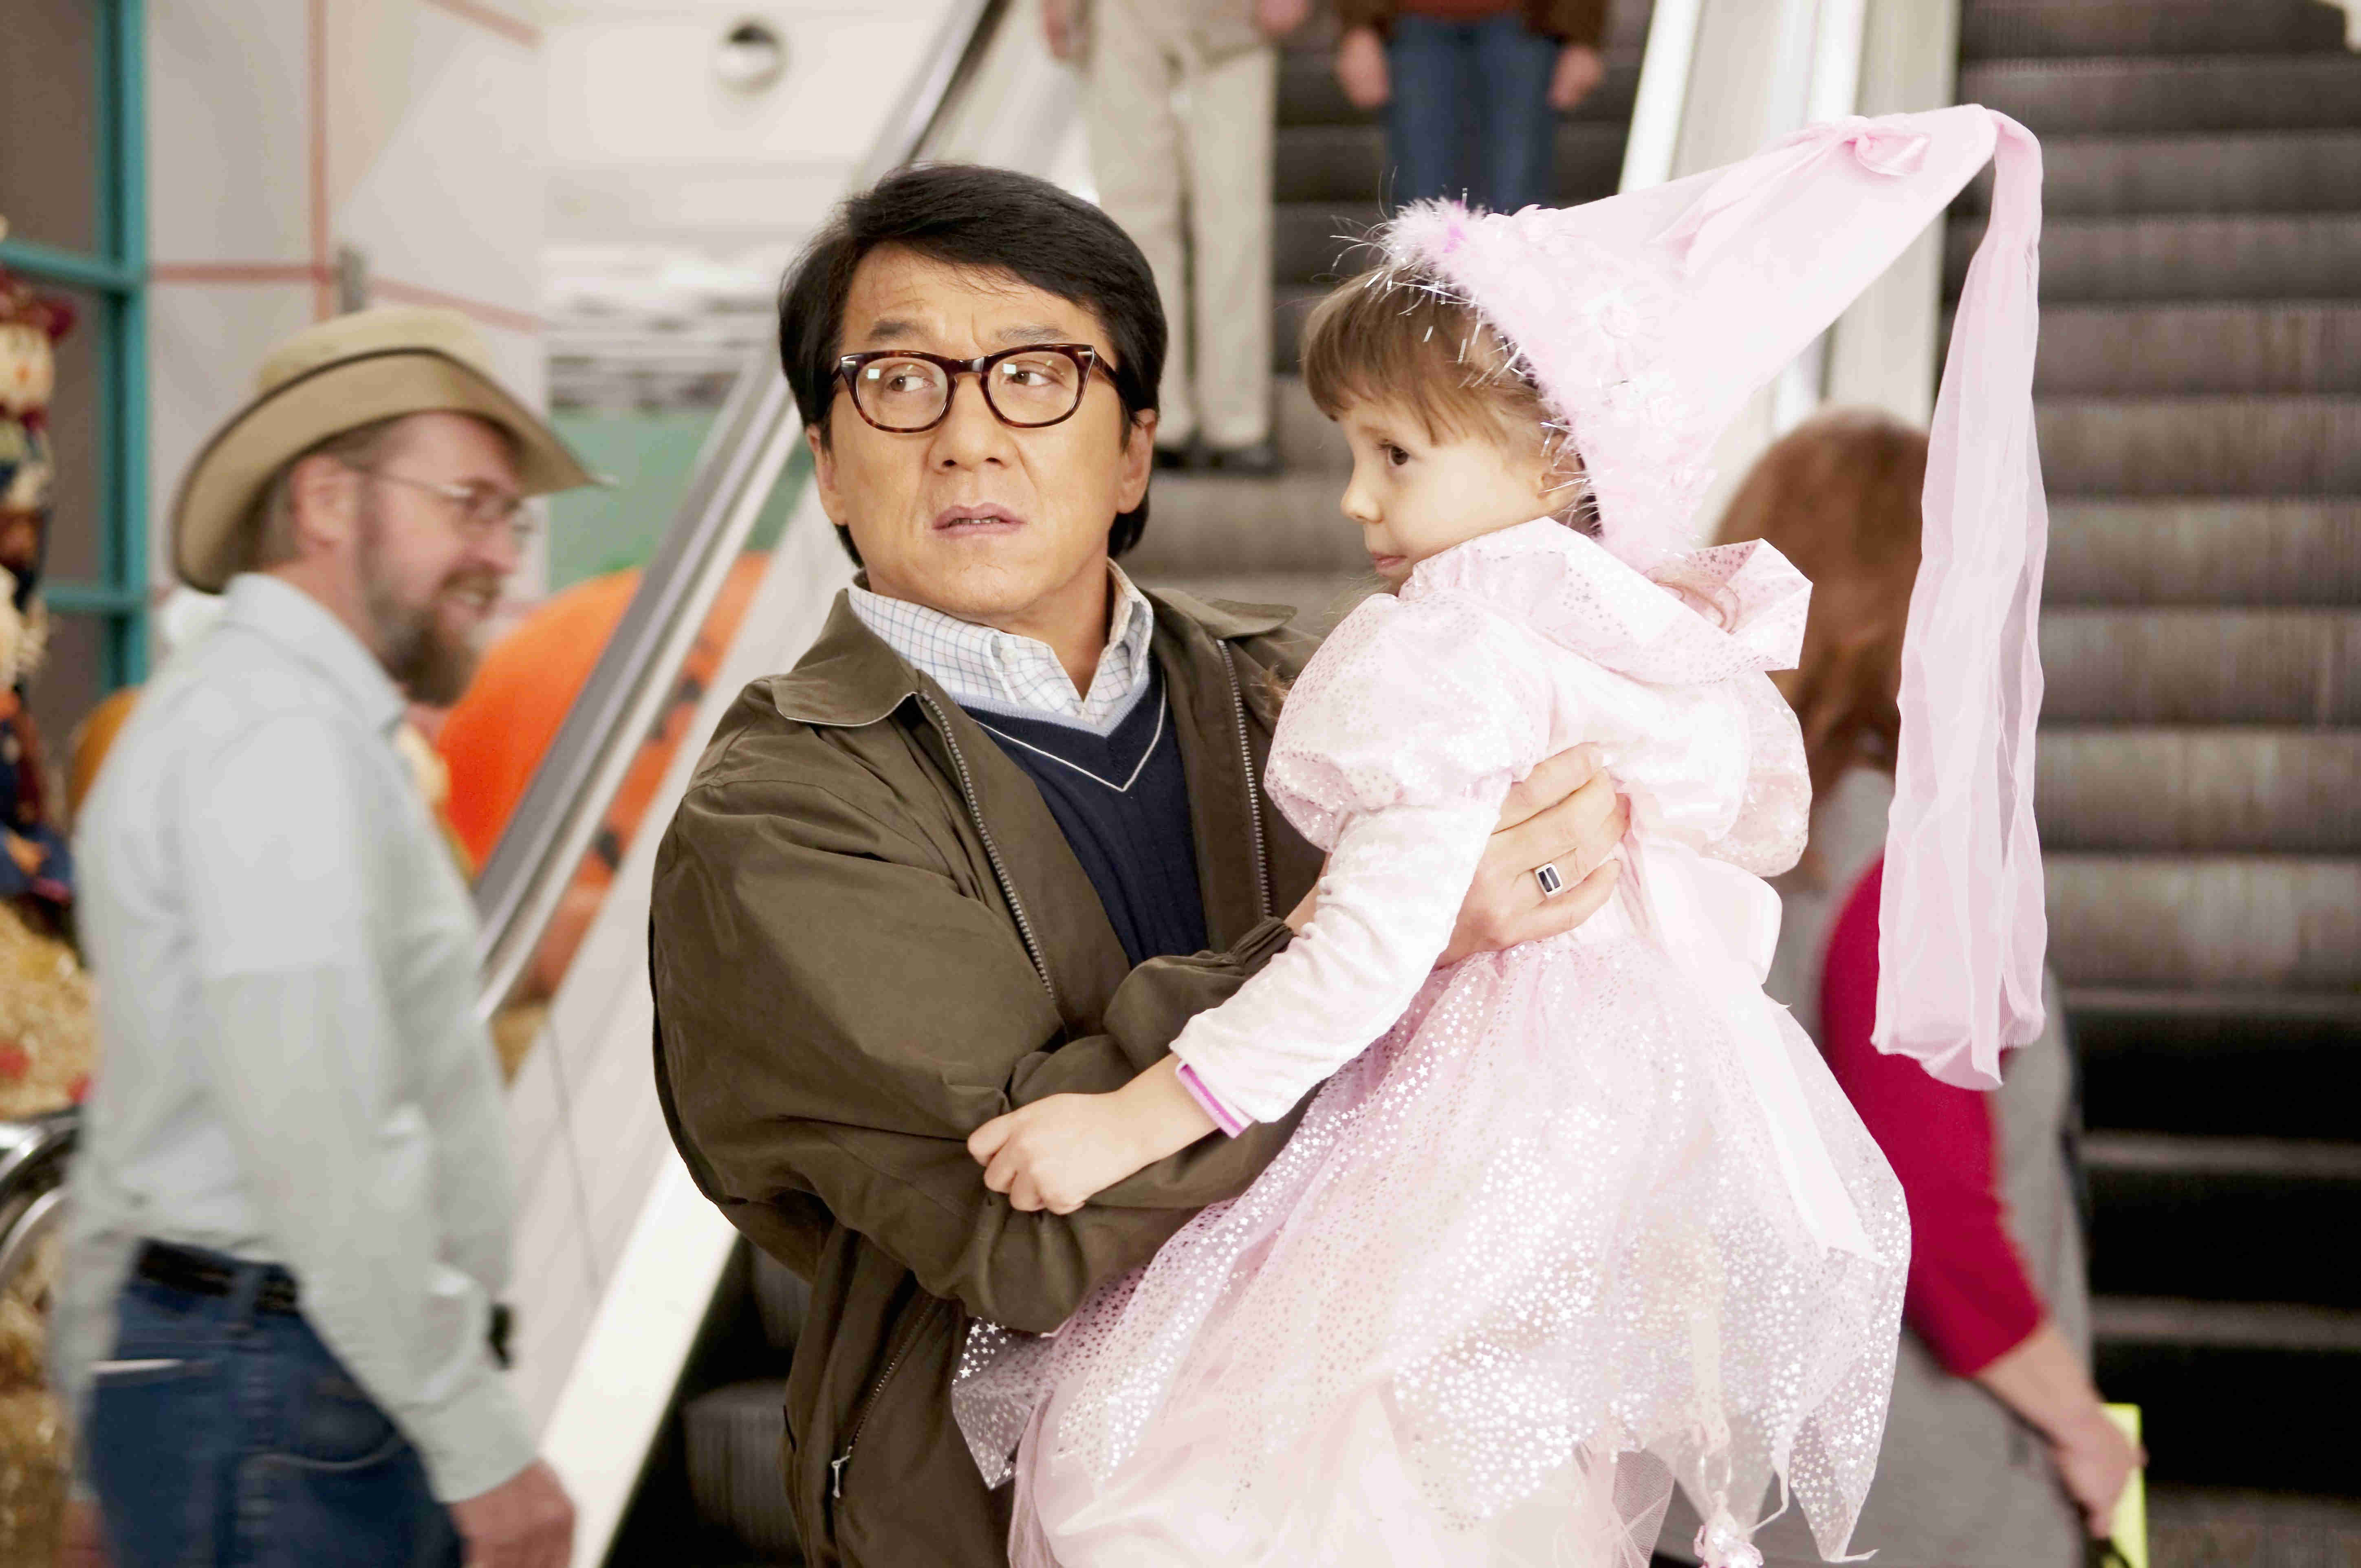 Jackie Chan stars as Bob Ho and Alina Foley stars as Nora in Lionsgate Films' The Spy Next Door (2010). Photo credit by Colleen Hayes.